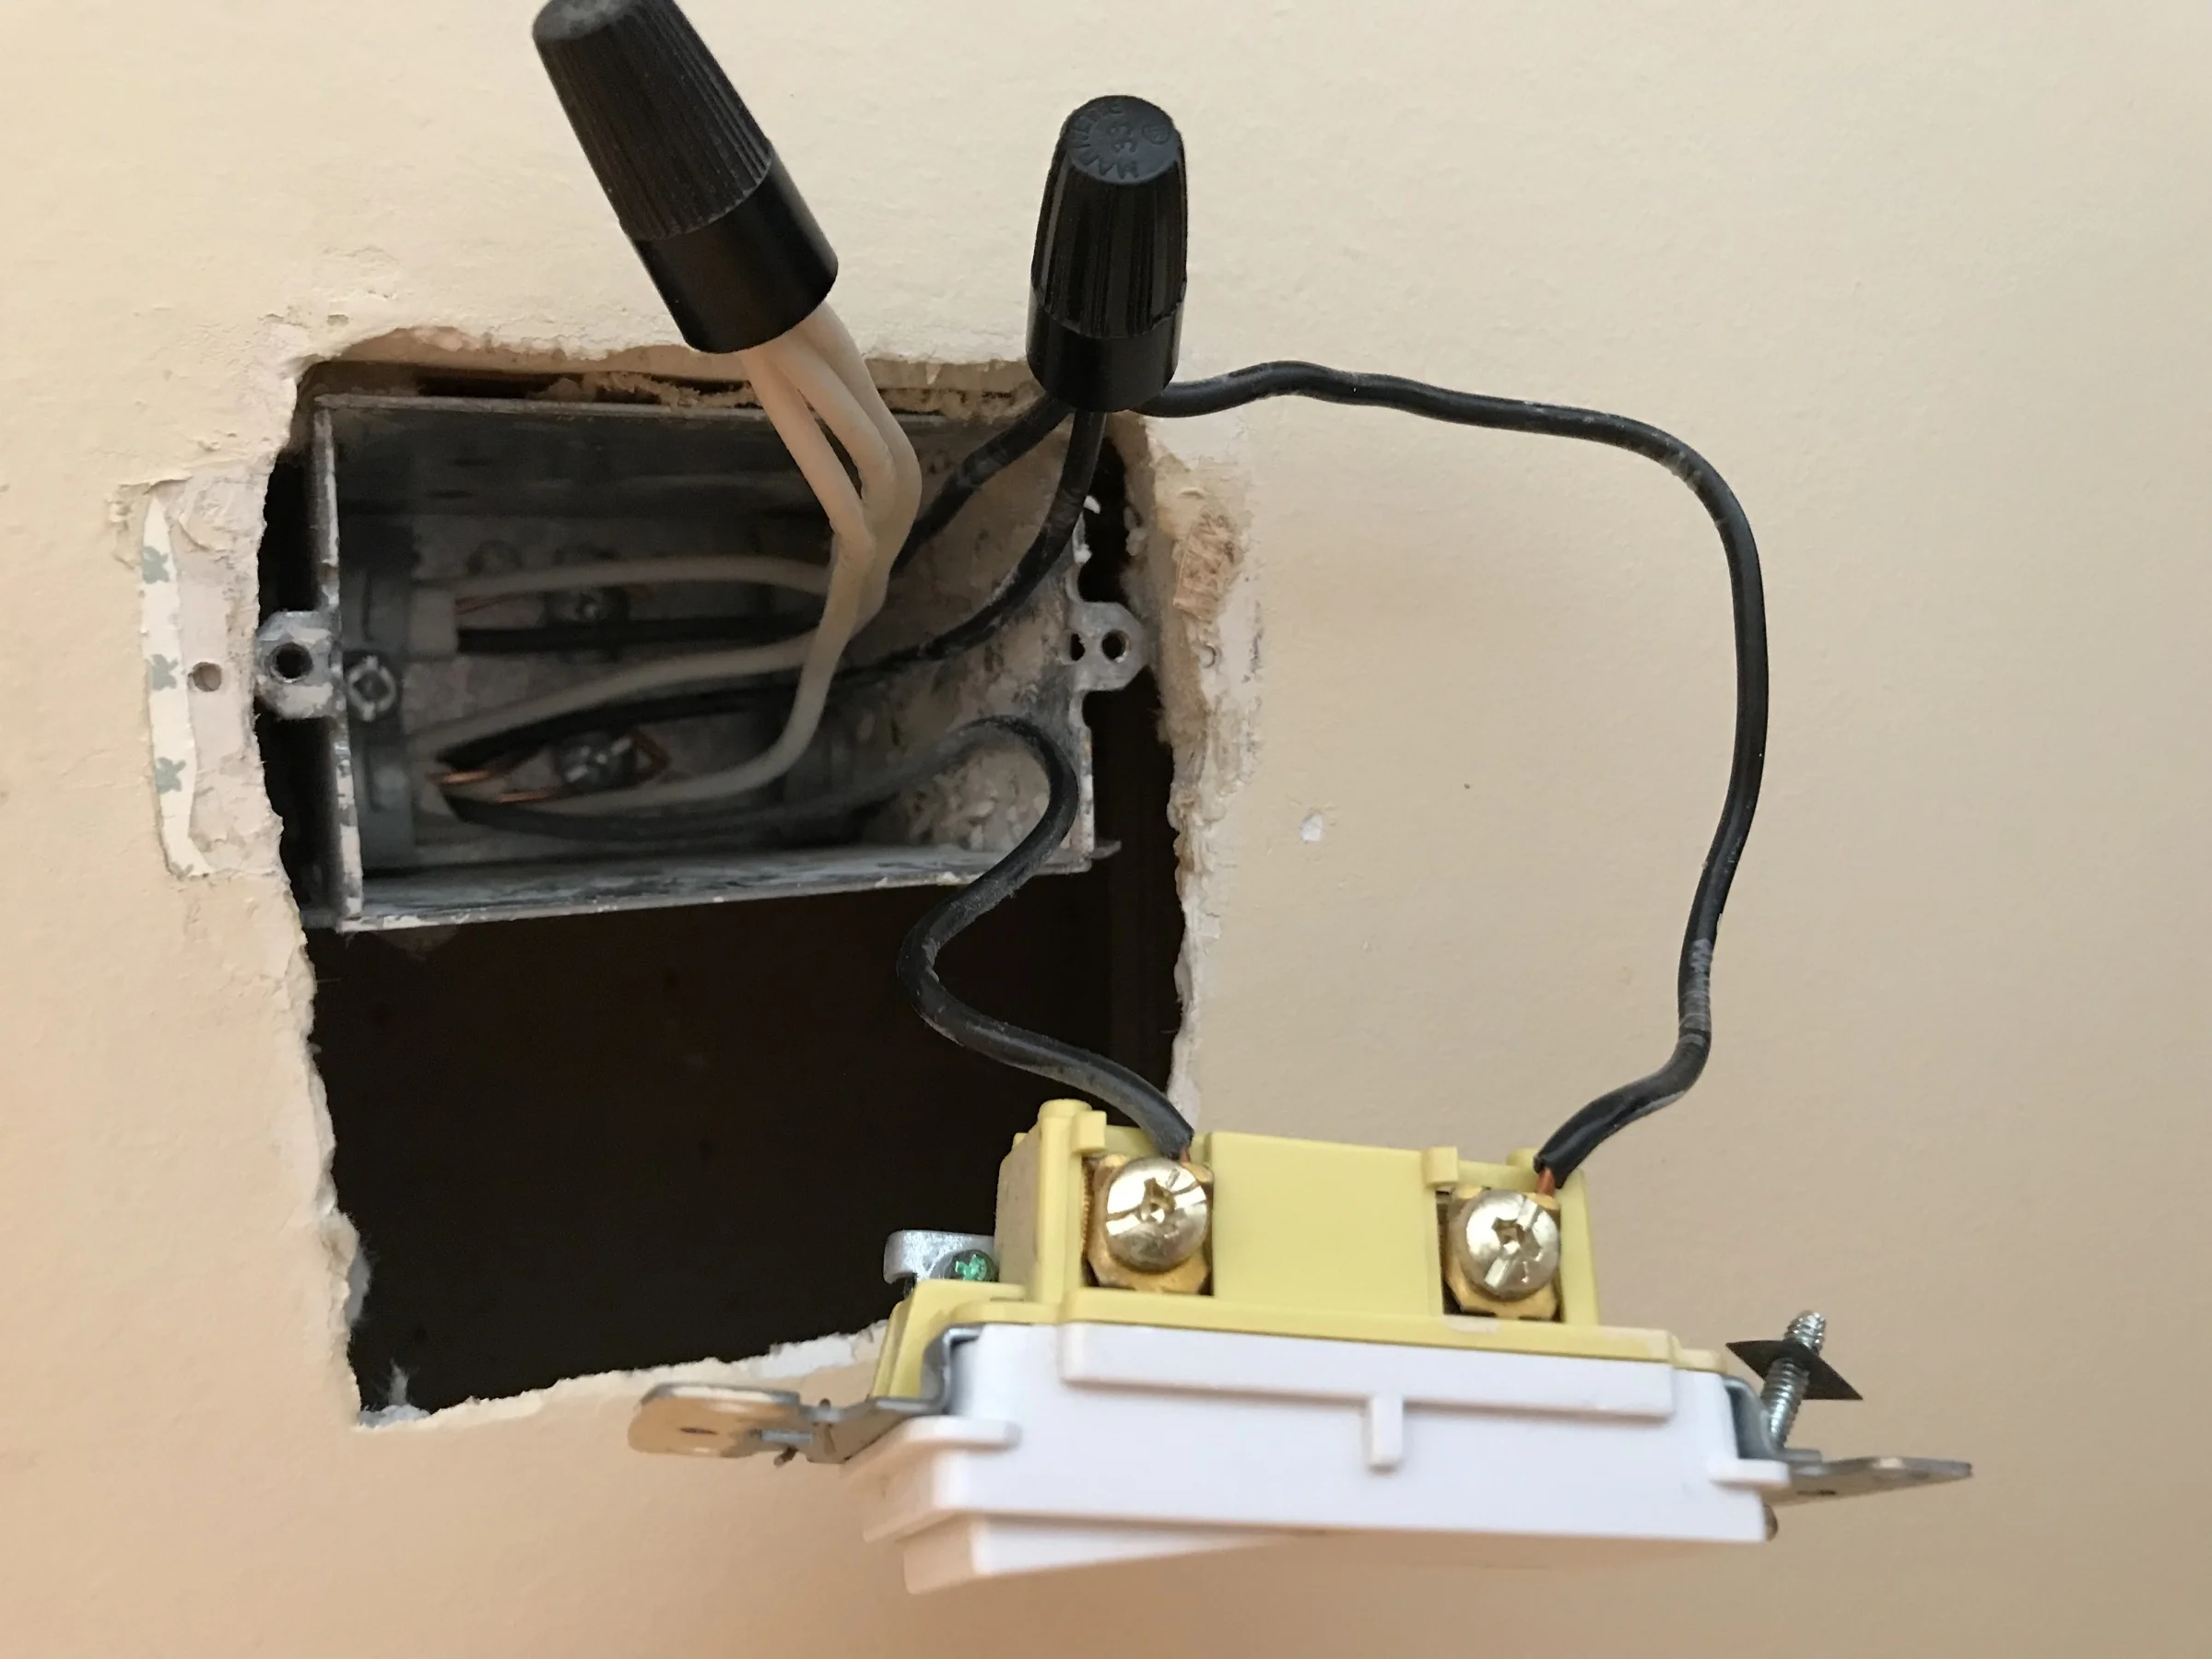 How To Connect An Exhaust Fan To A Light Switch